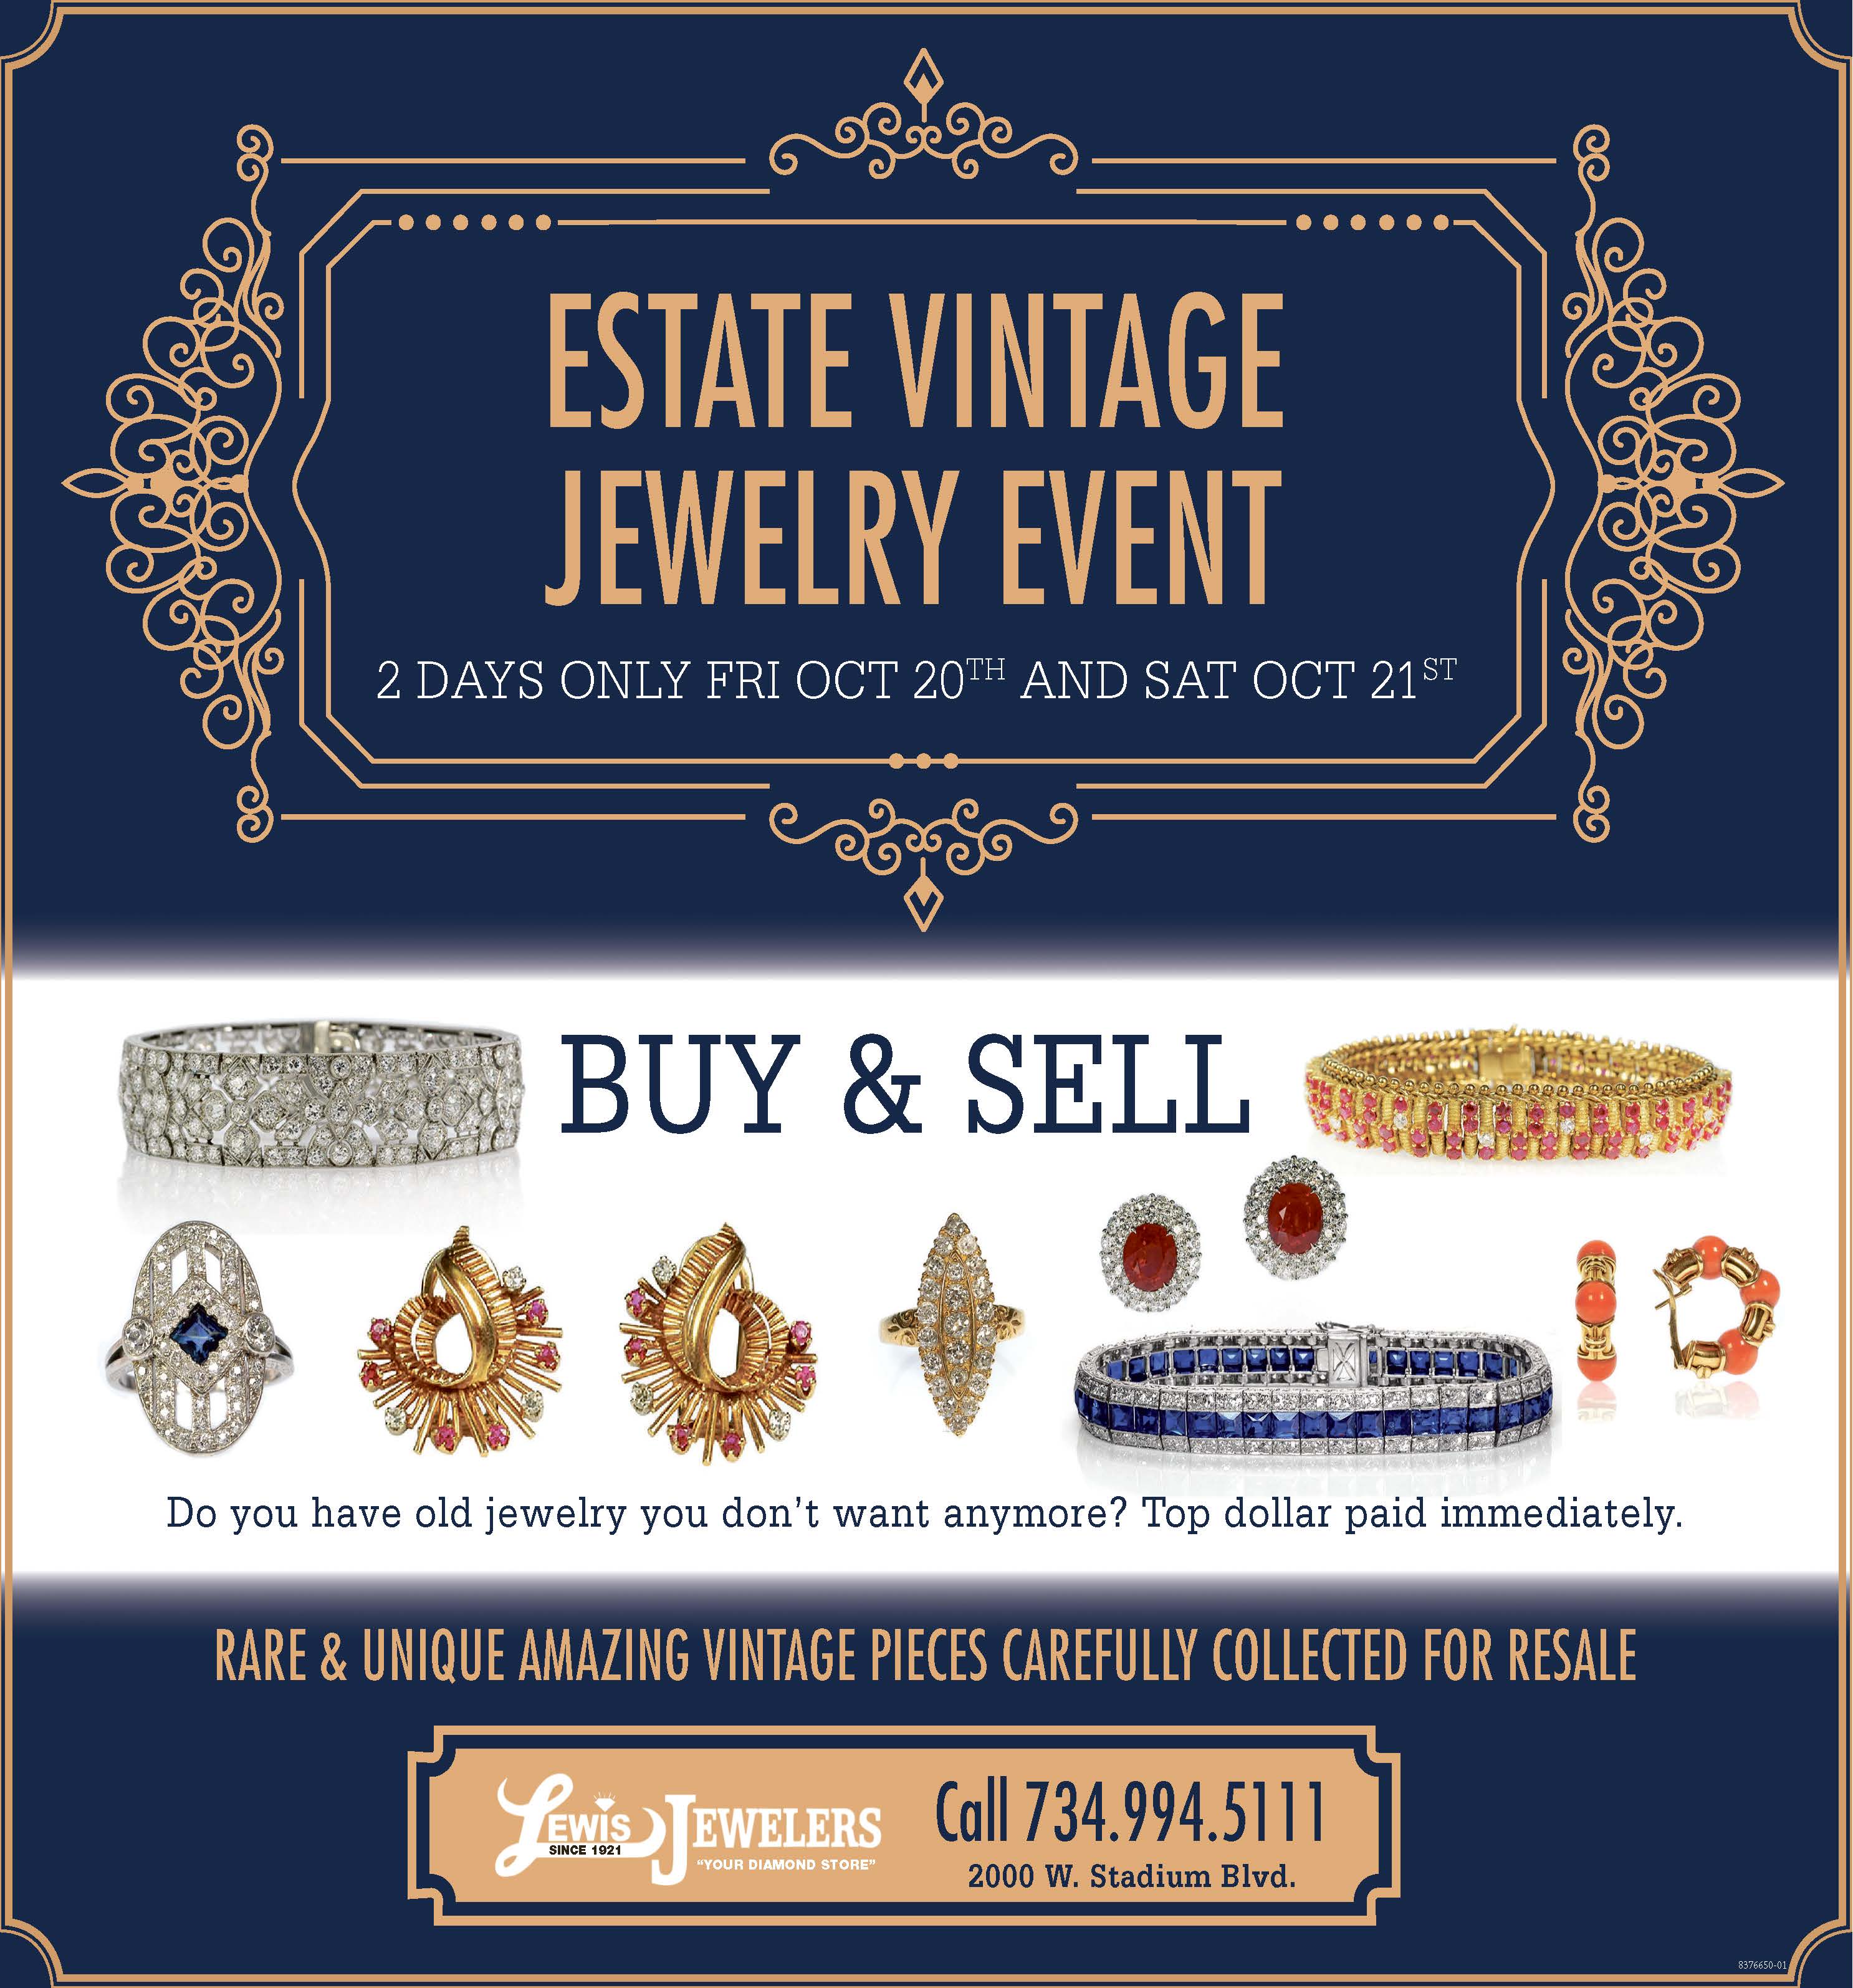 Estate, Vintage, and Jewelry Event sell at Lewis Jewelers